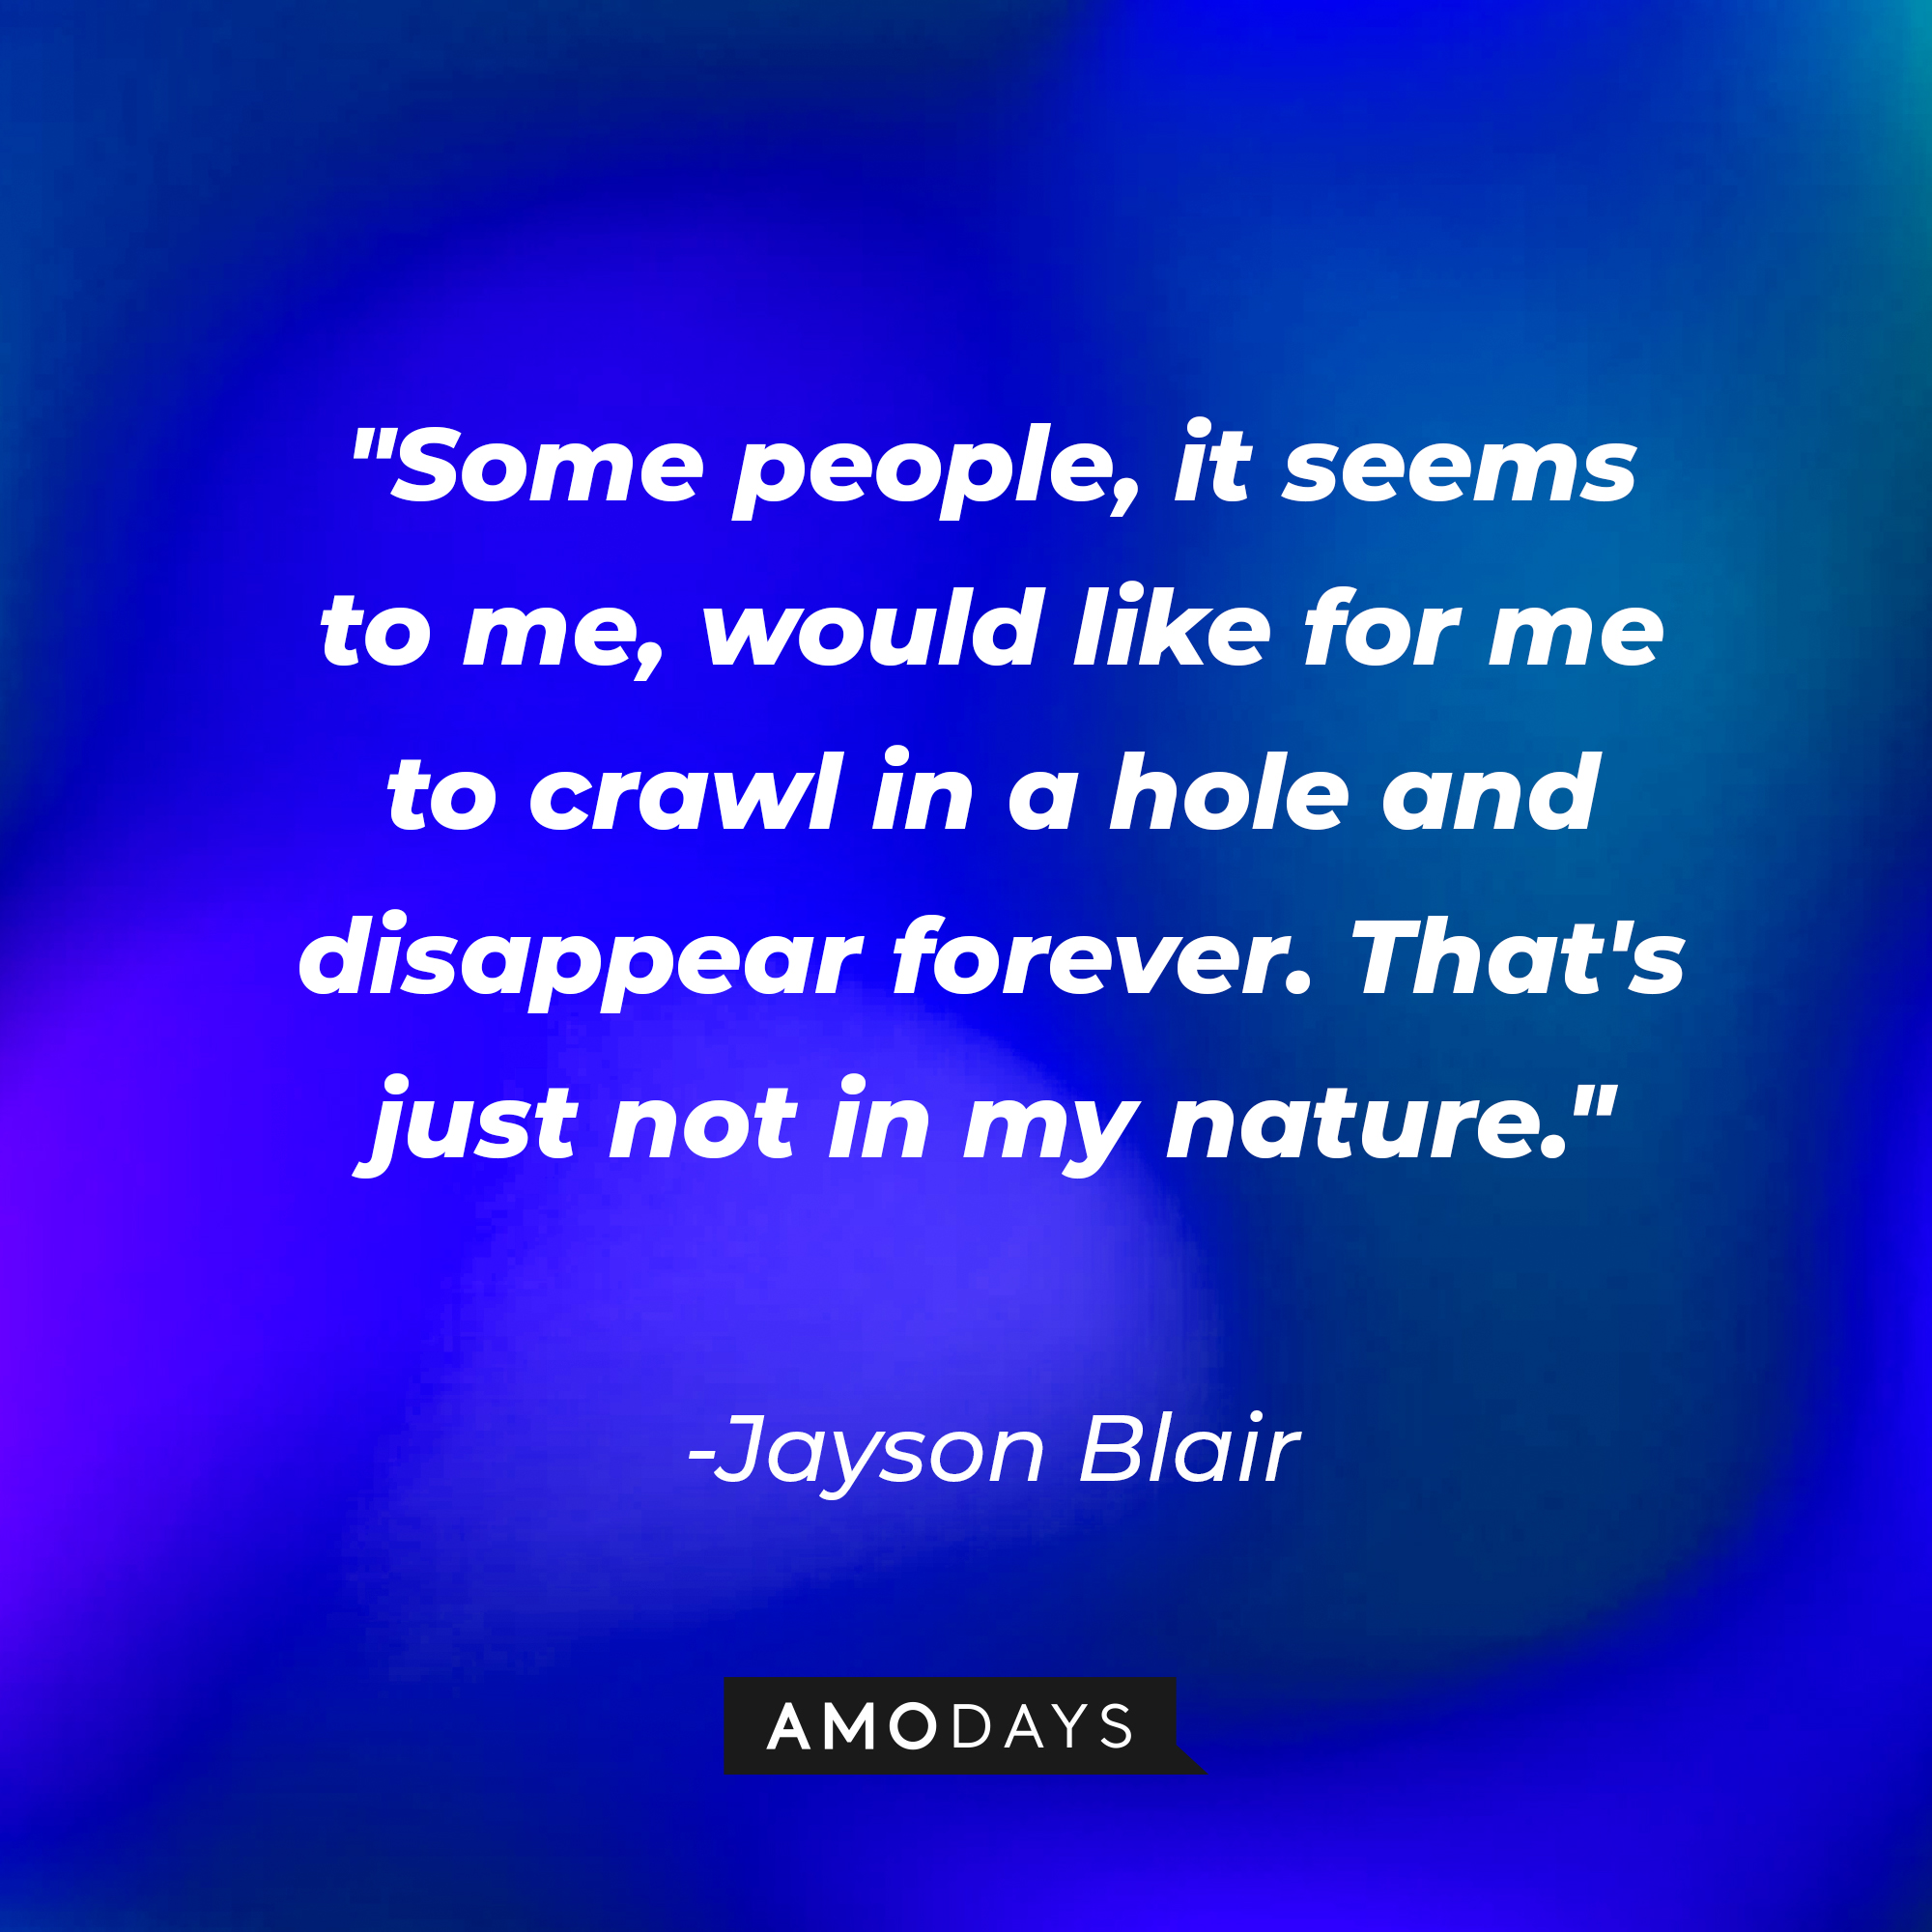 Jayson Blair's quote: "Some people, it seems to me, would like for me to crawl in a hole and disappear forever. That's just not in my nature." | Image: AmoDays